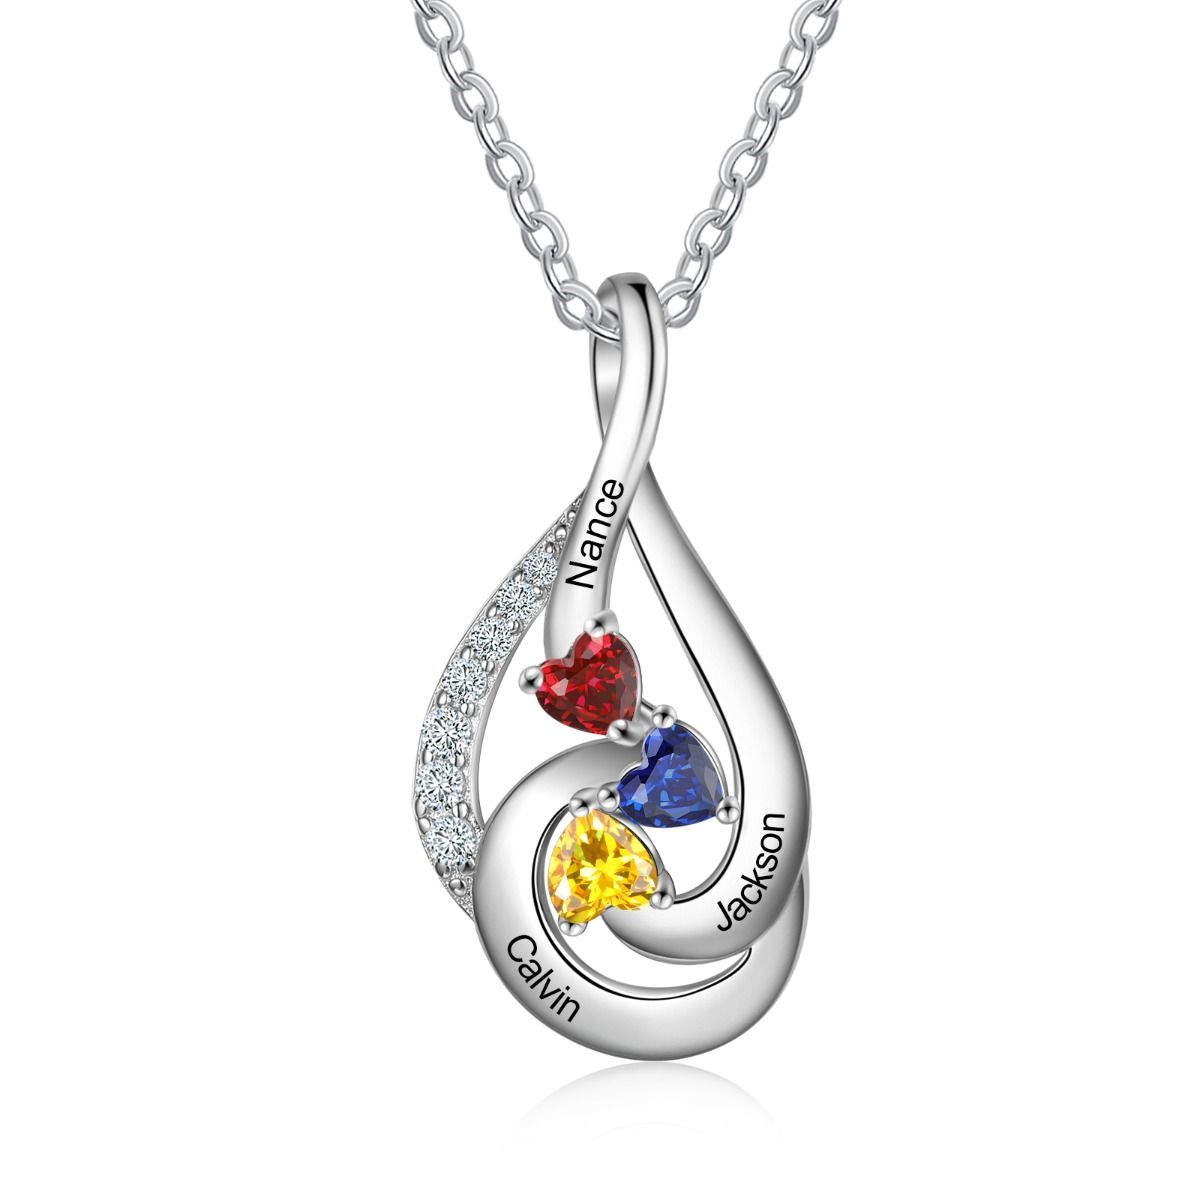 Customised Drop Shape Necklace With 2-4 Birthstones | Bespoke Engraved Names Necklace With Birthstones